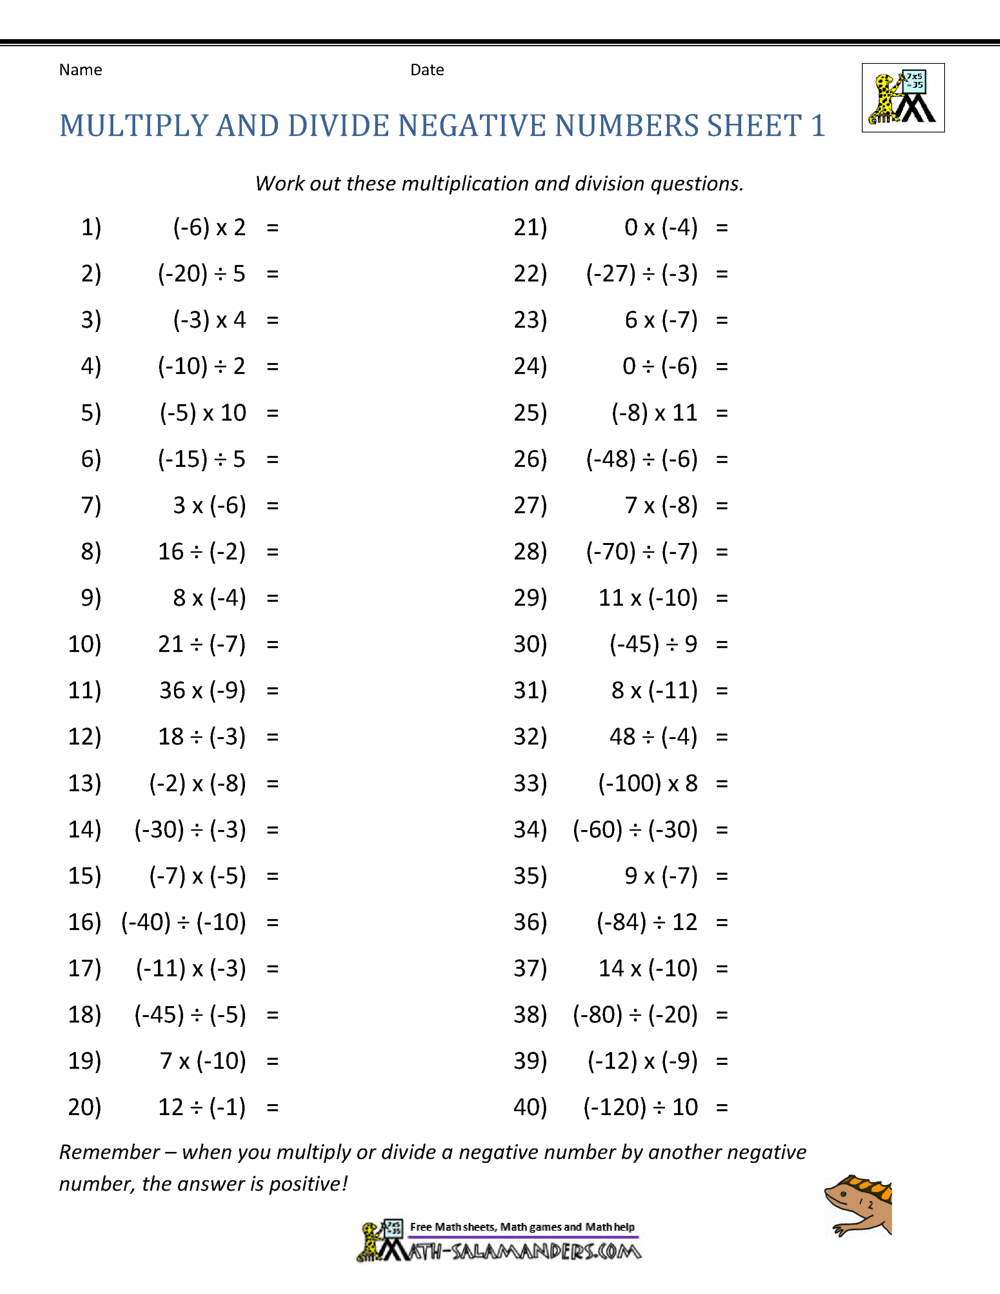 Multiply and Divide Negative Numbers